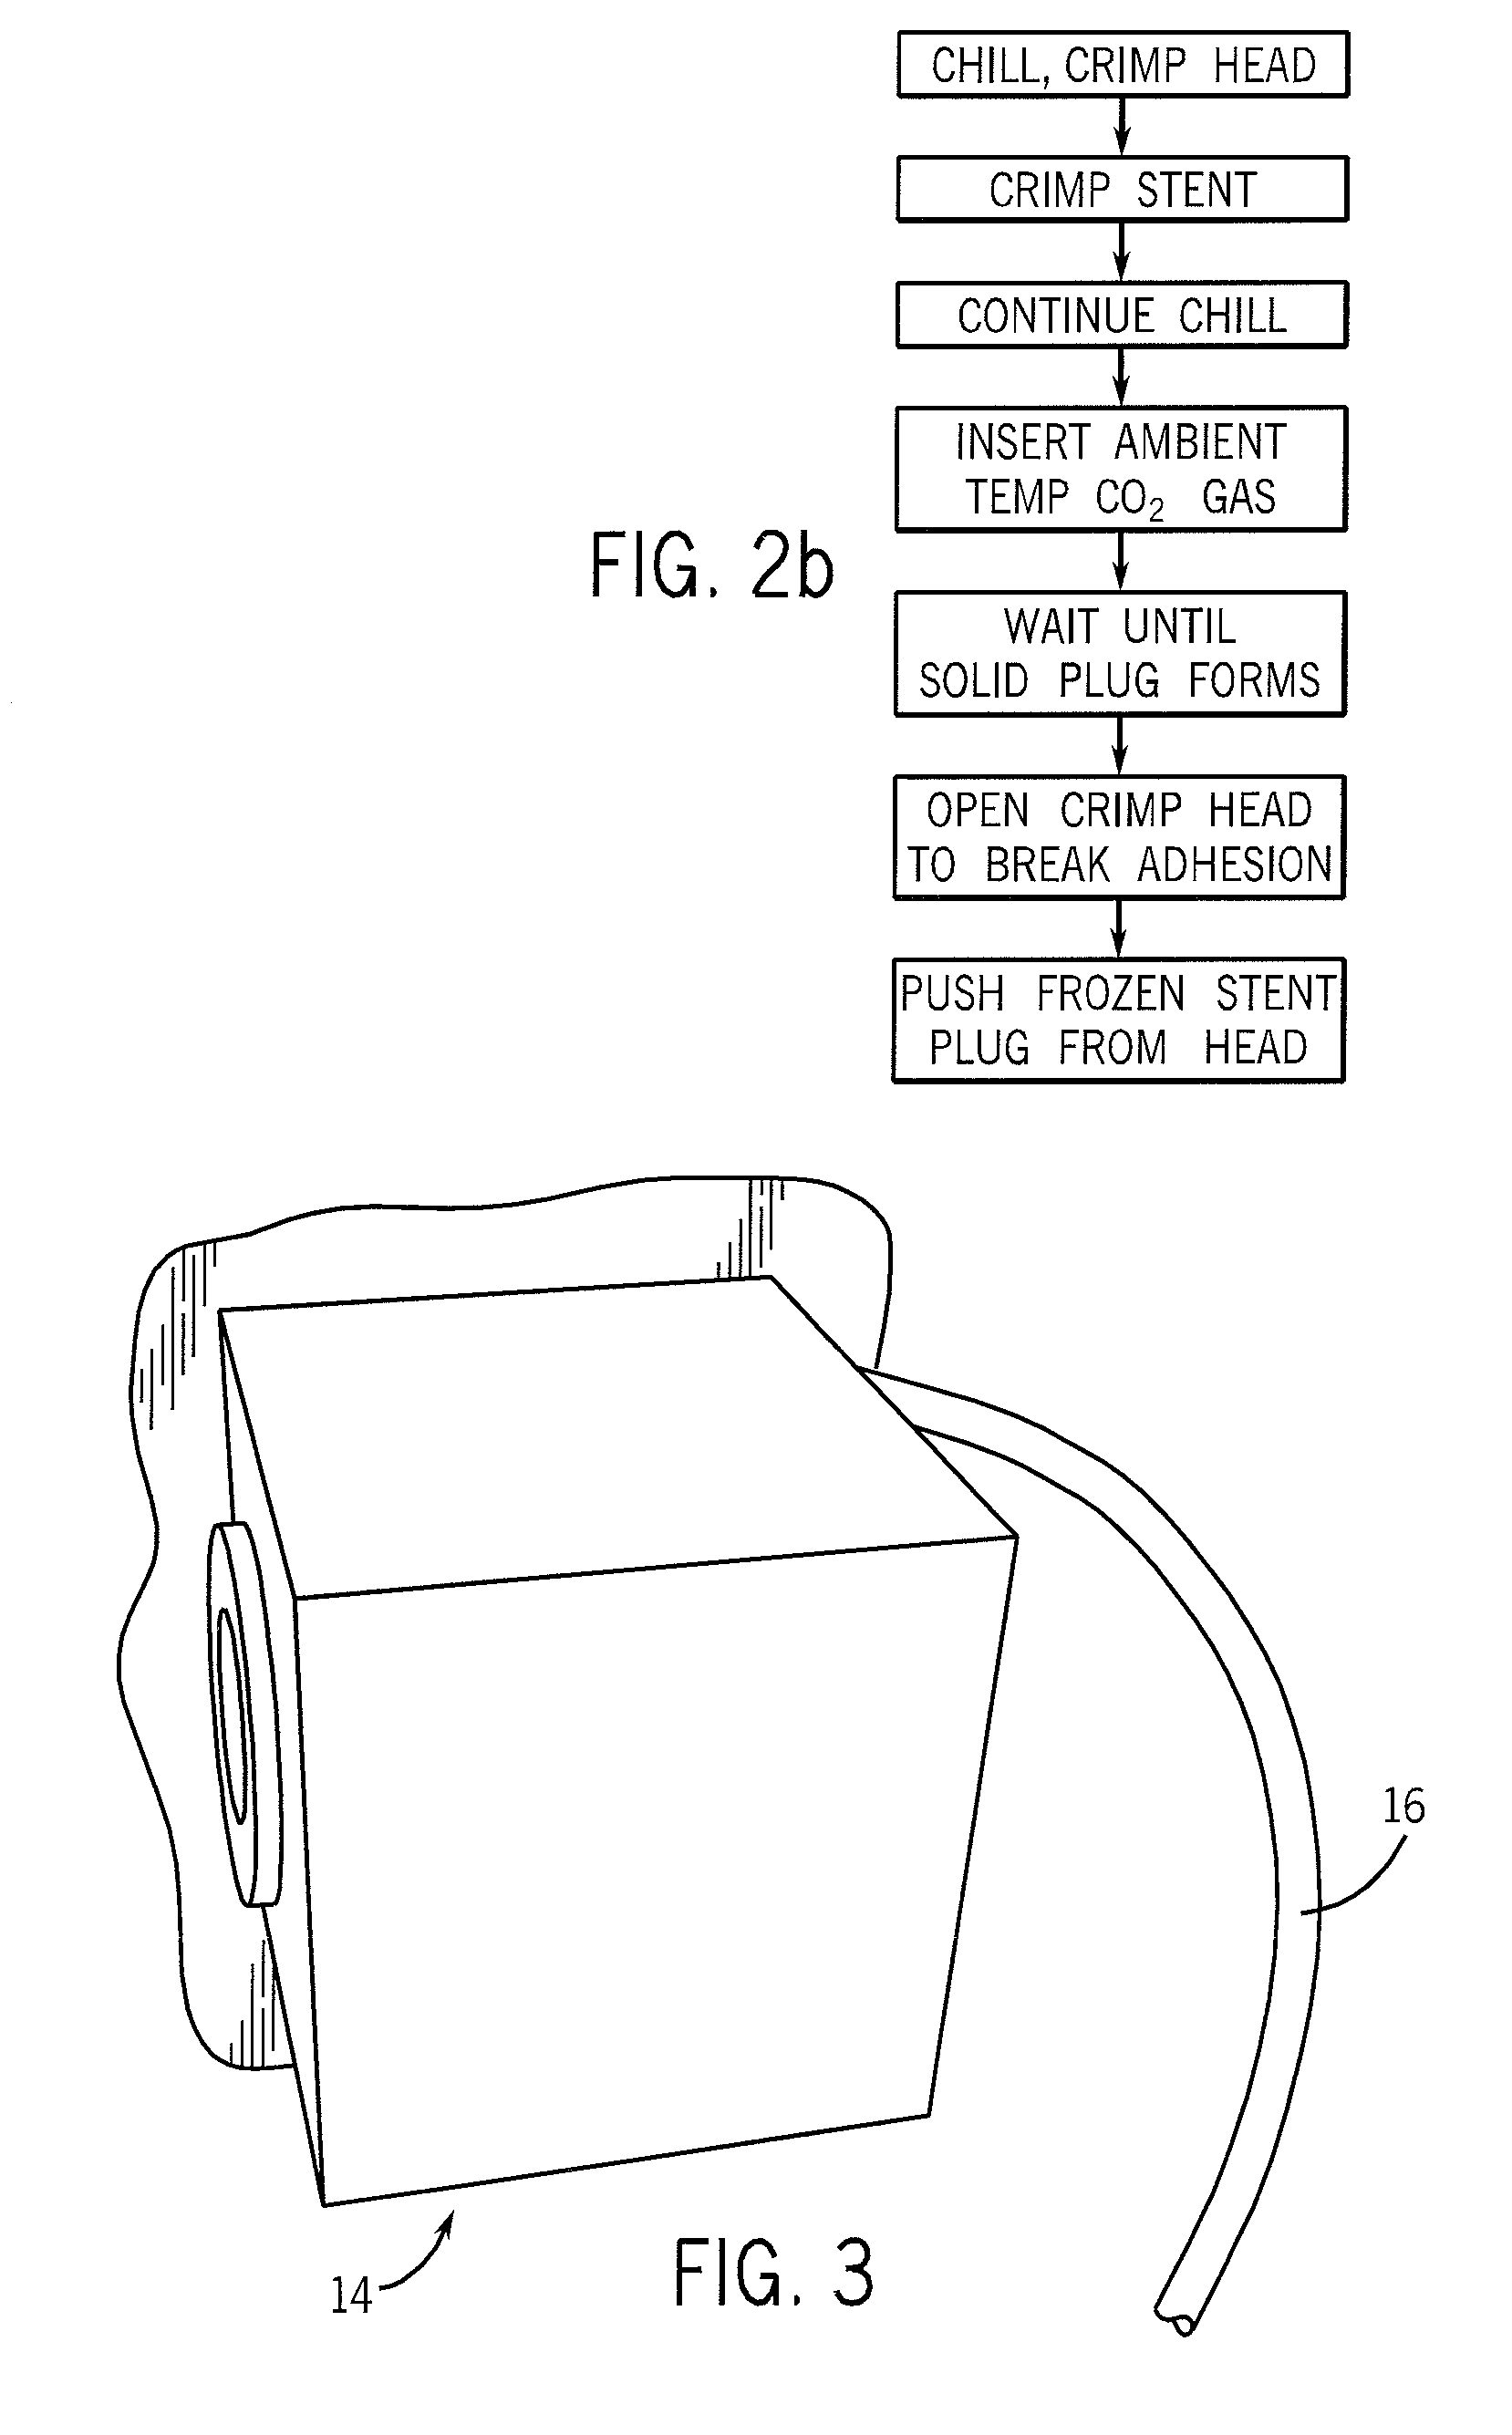 Method and apparatus for cold loading articles